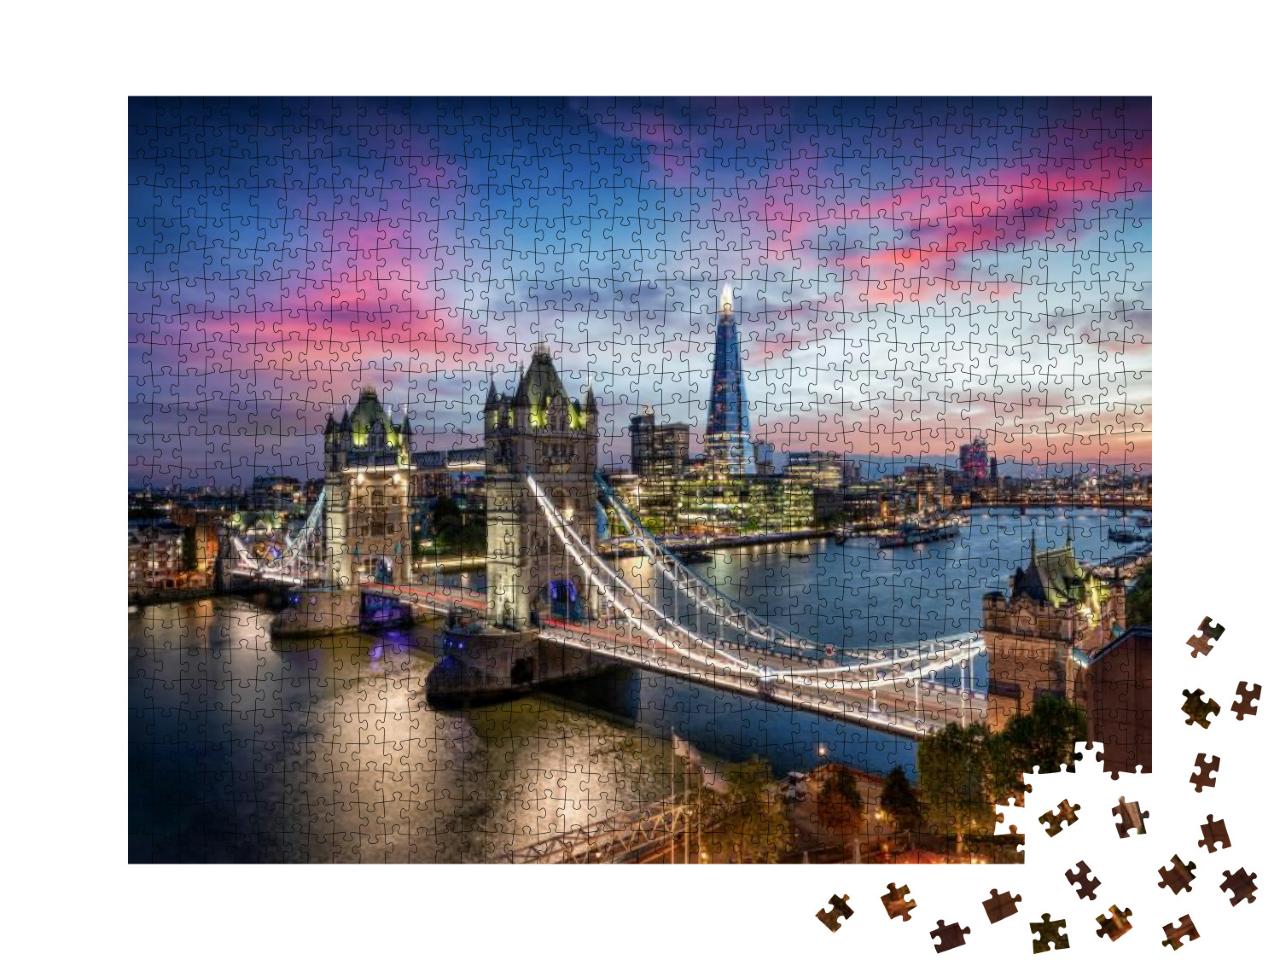 Aerial, Panoramic View to the Lit Tower Bridge & Skyline... Jigsaw Puzzle with 1000 pieces